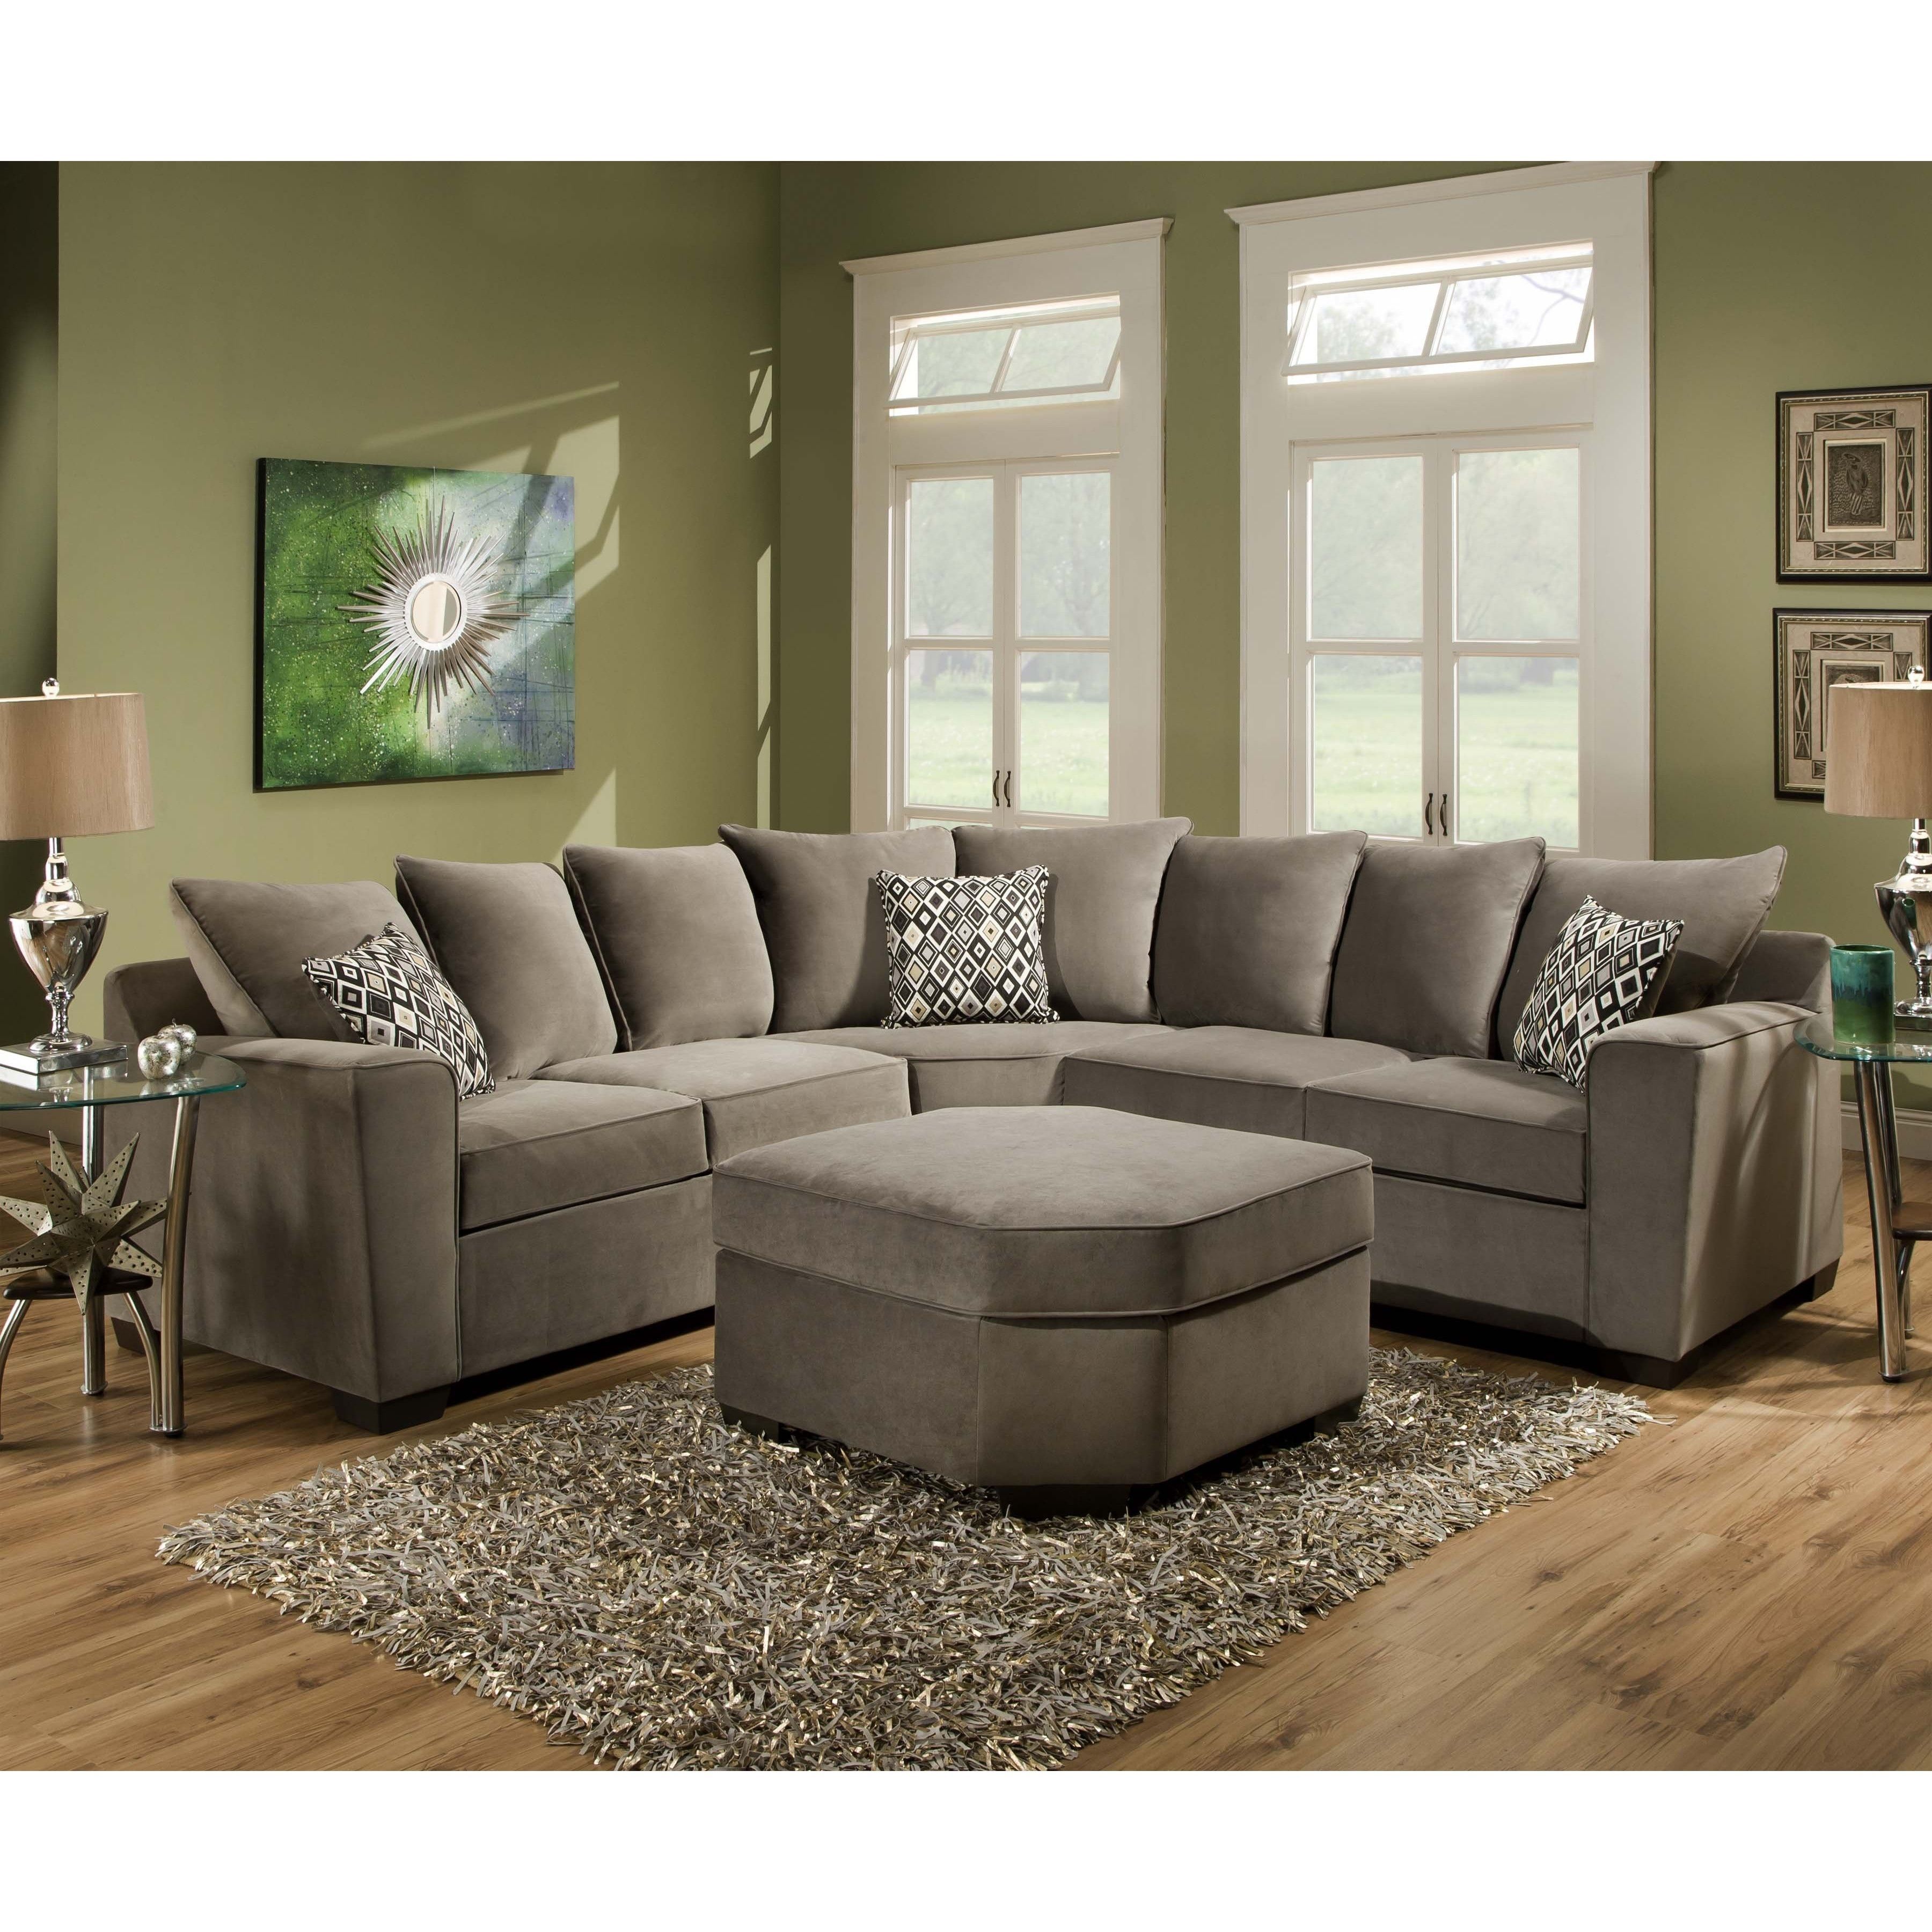 Featured Photo of 10 Collection of Roanoke Va Sectional Sofas